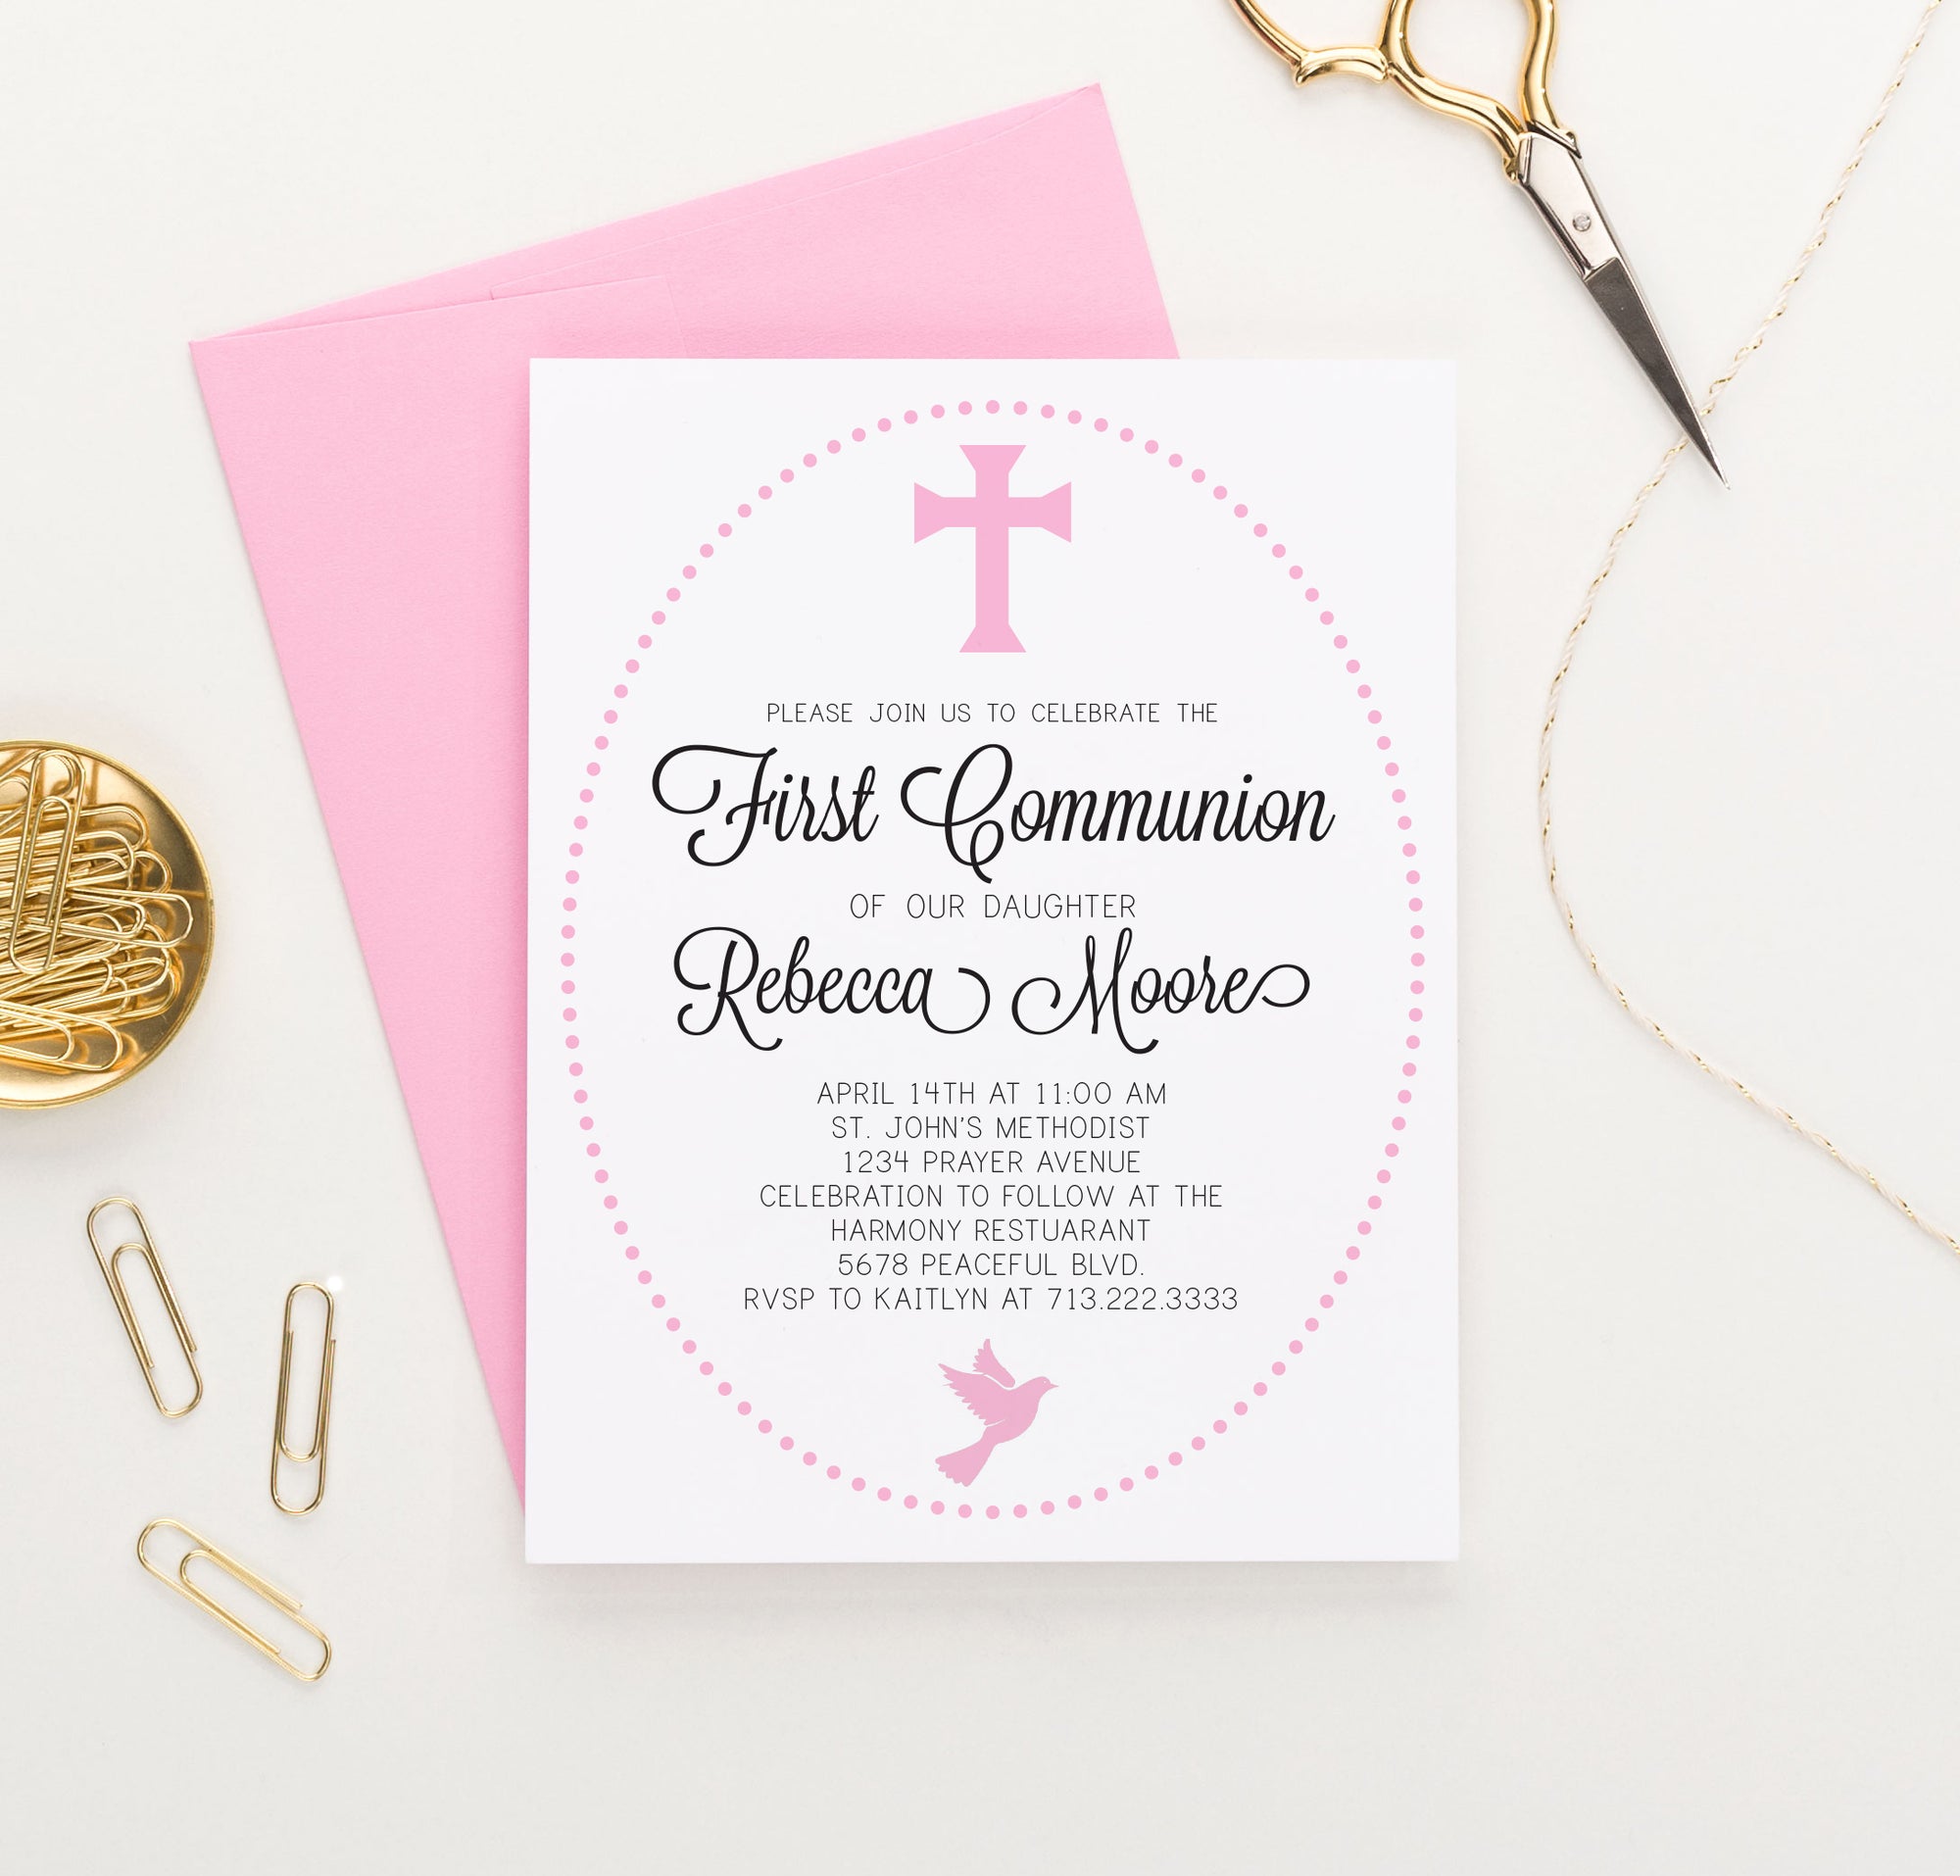 Personalized Pink 1st Communion Invitations With Polka Dot Frame